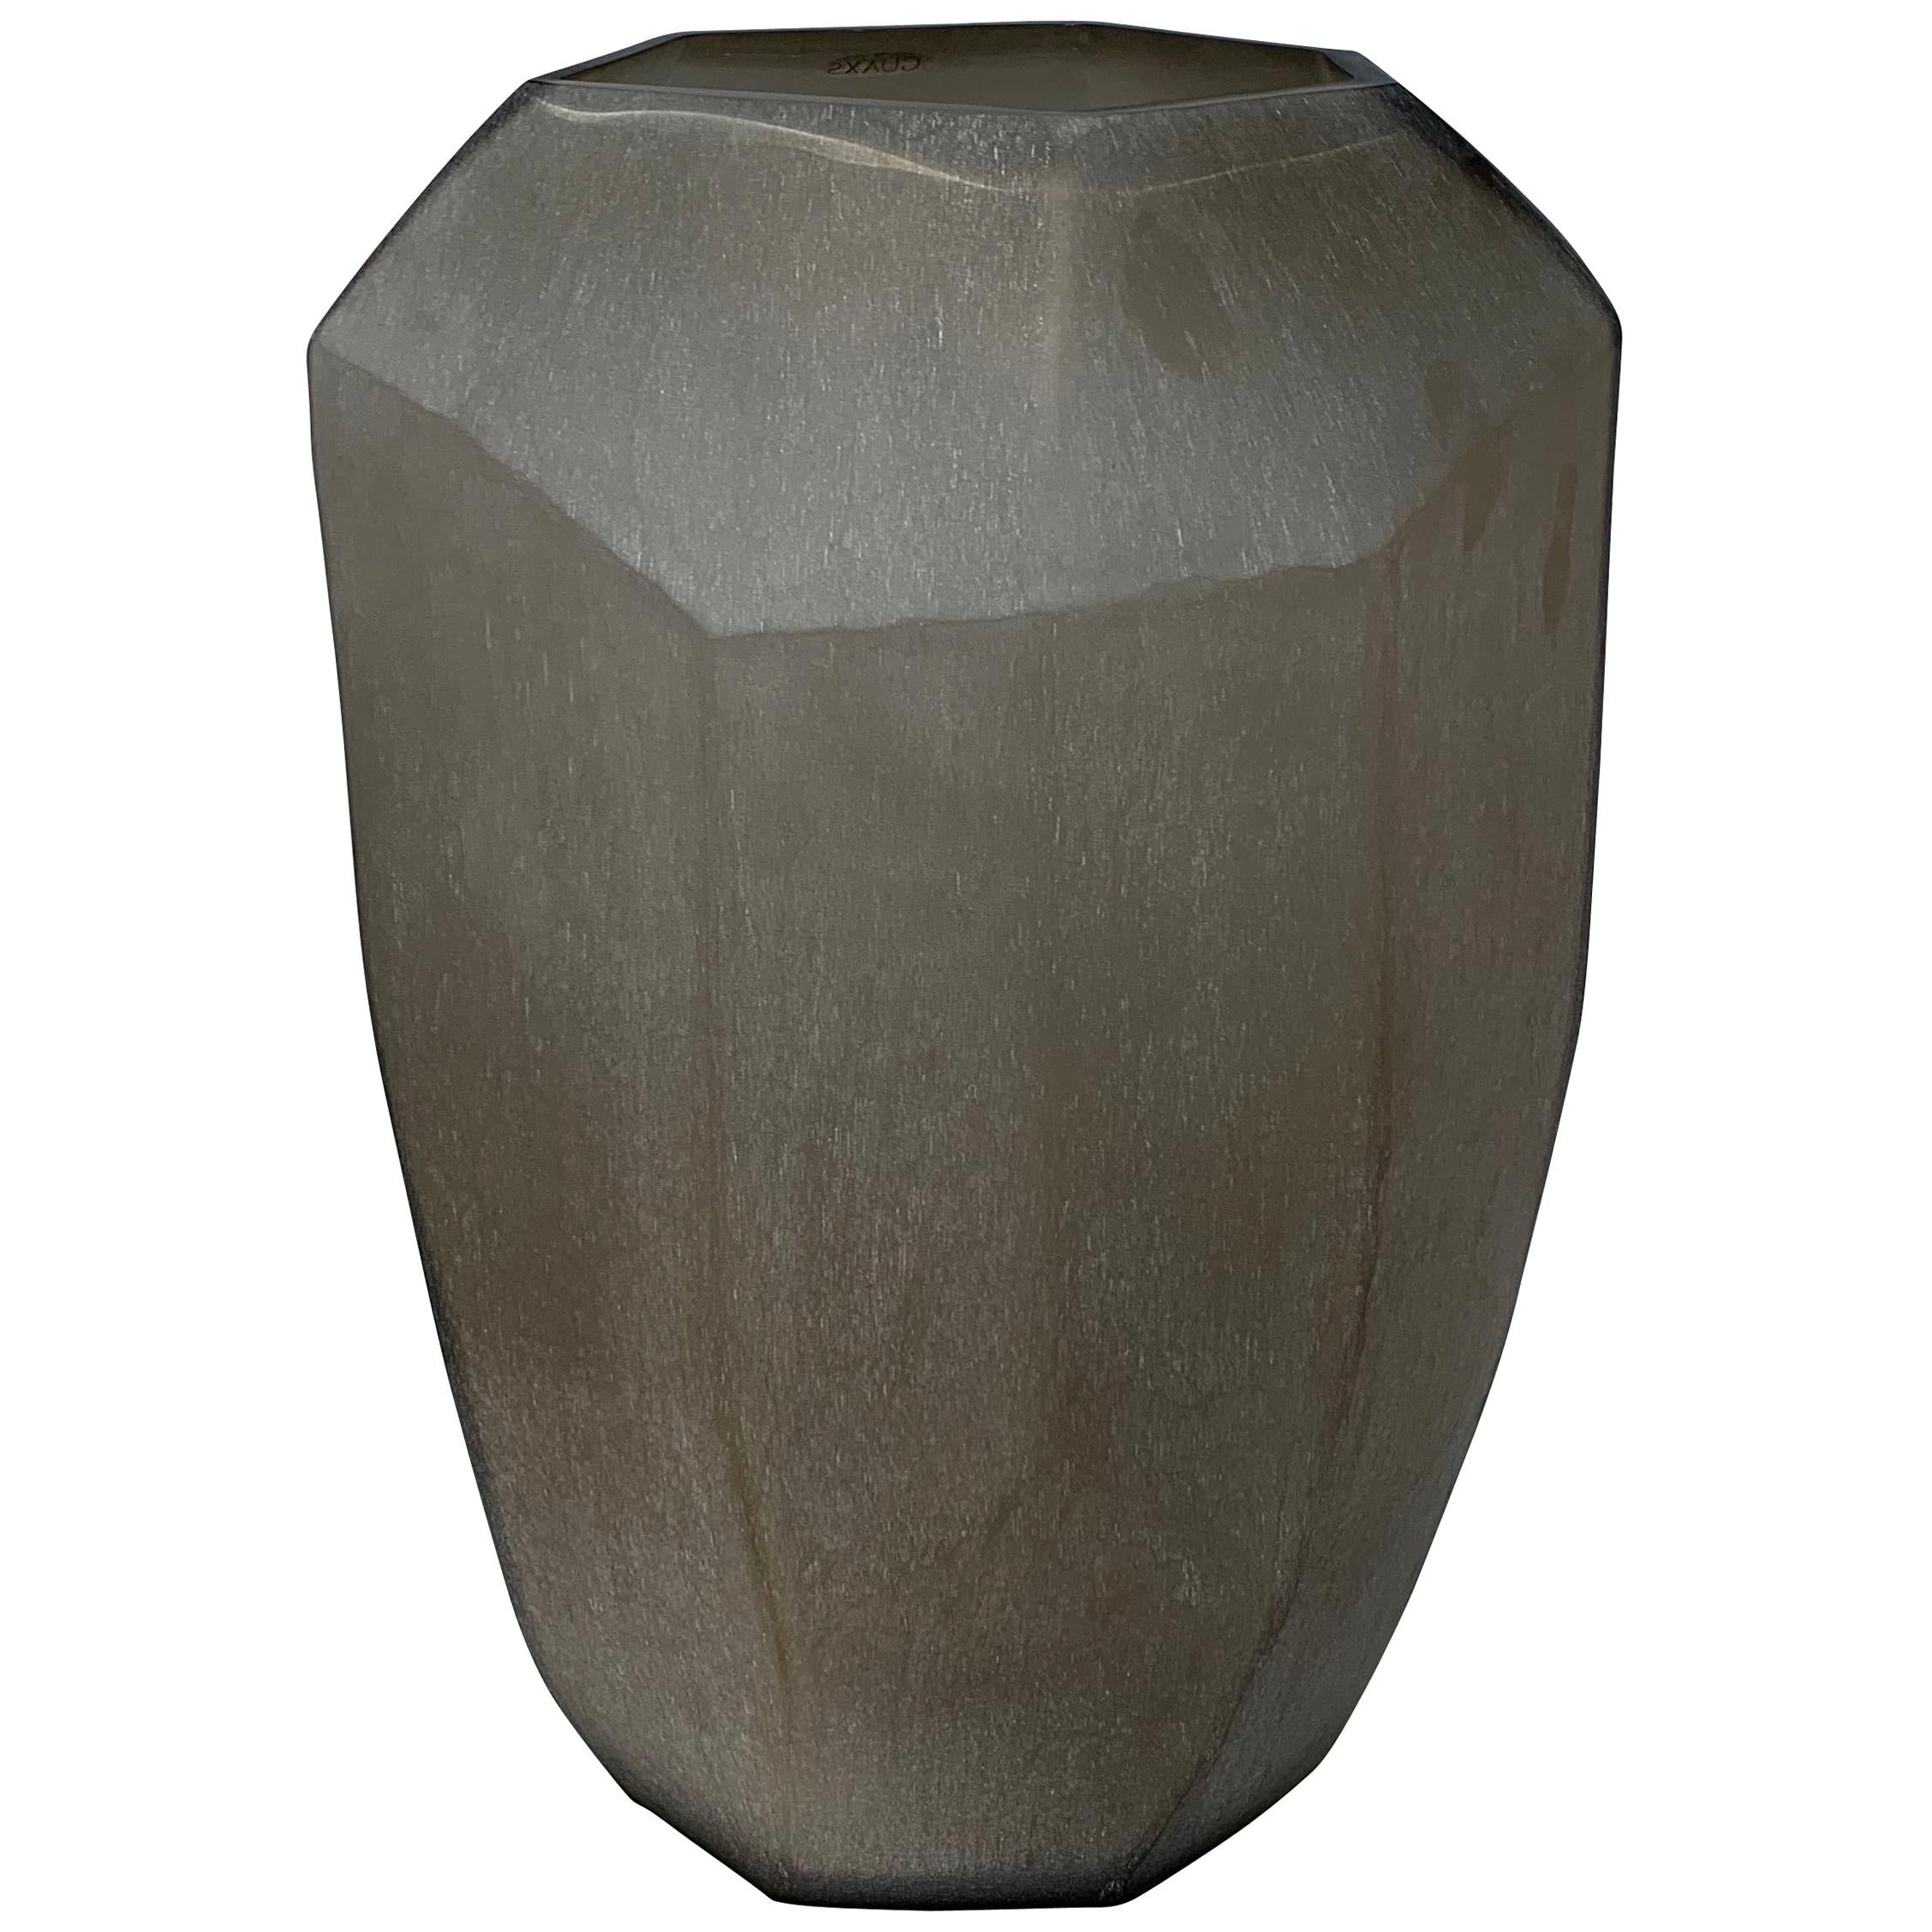 Cubist Design Tan Color Frosted Glass Vase, Romania, Contemporary